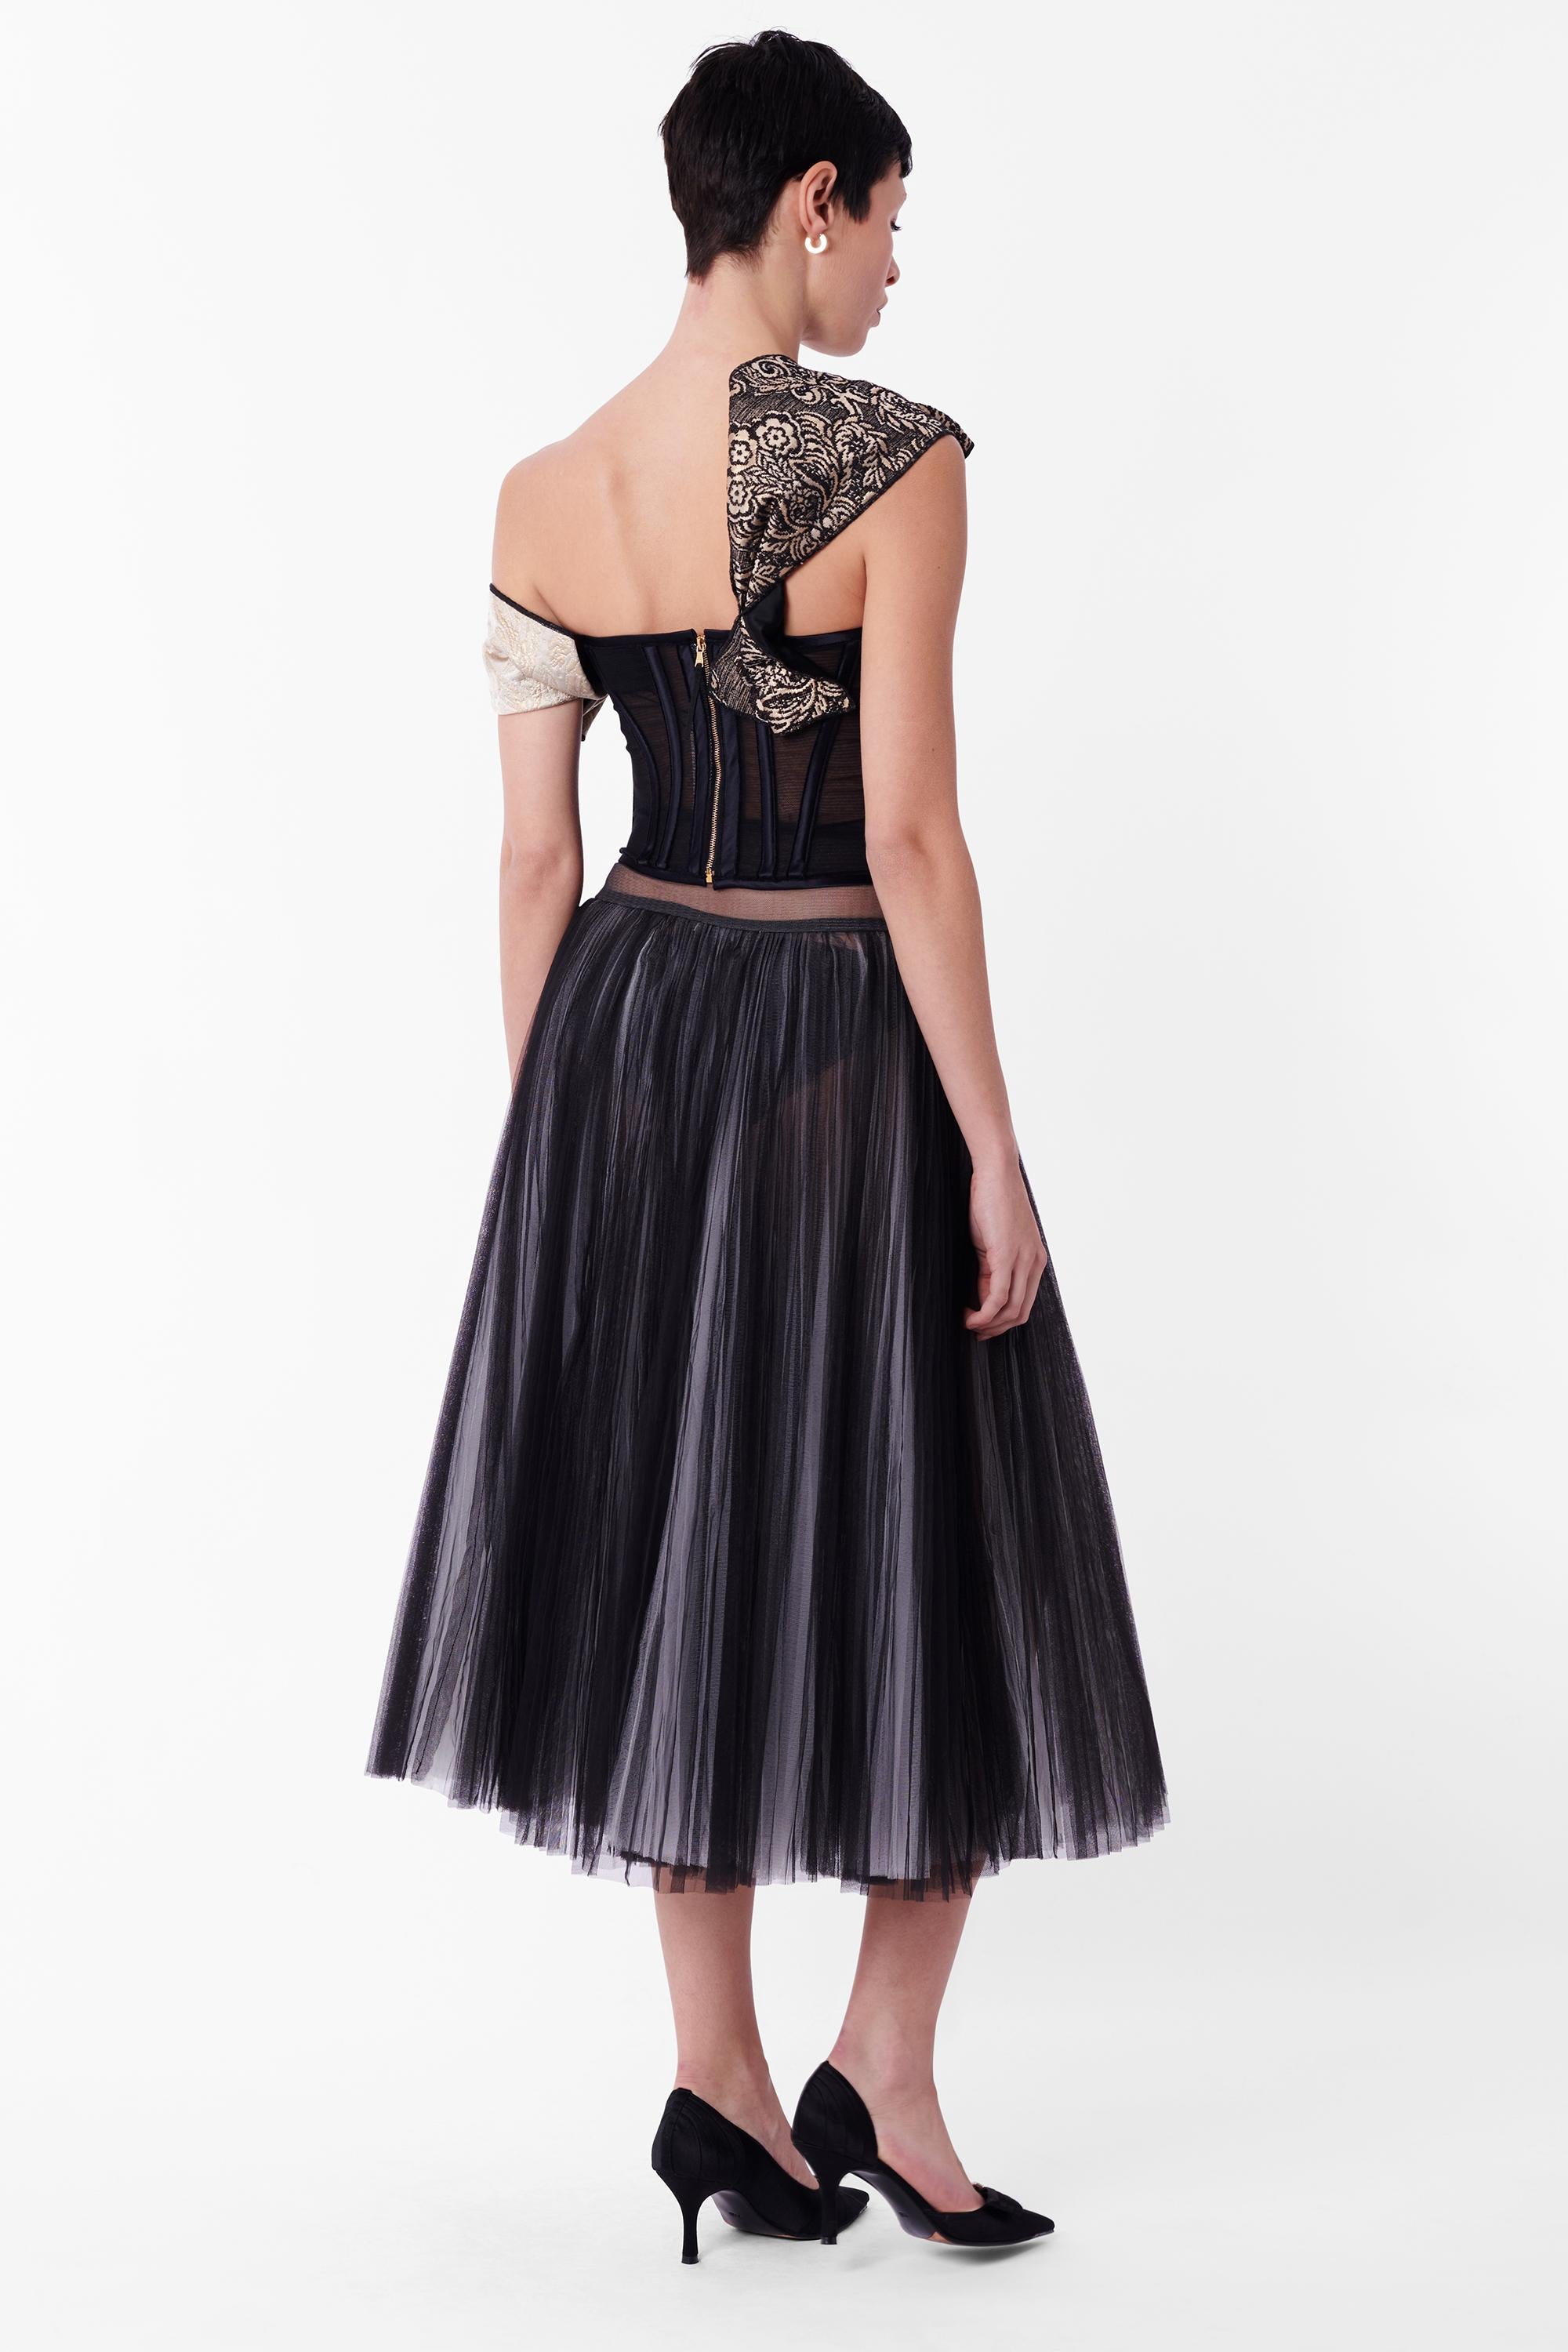 Vintage Black White Layered Tulle Sheer Skirt In Excellent Condition For Sale In London, GB